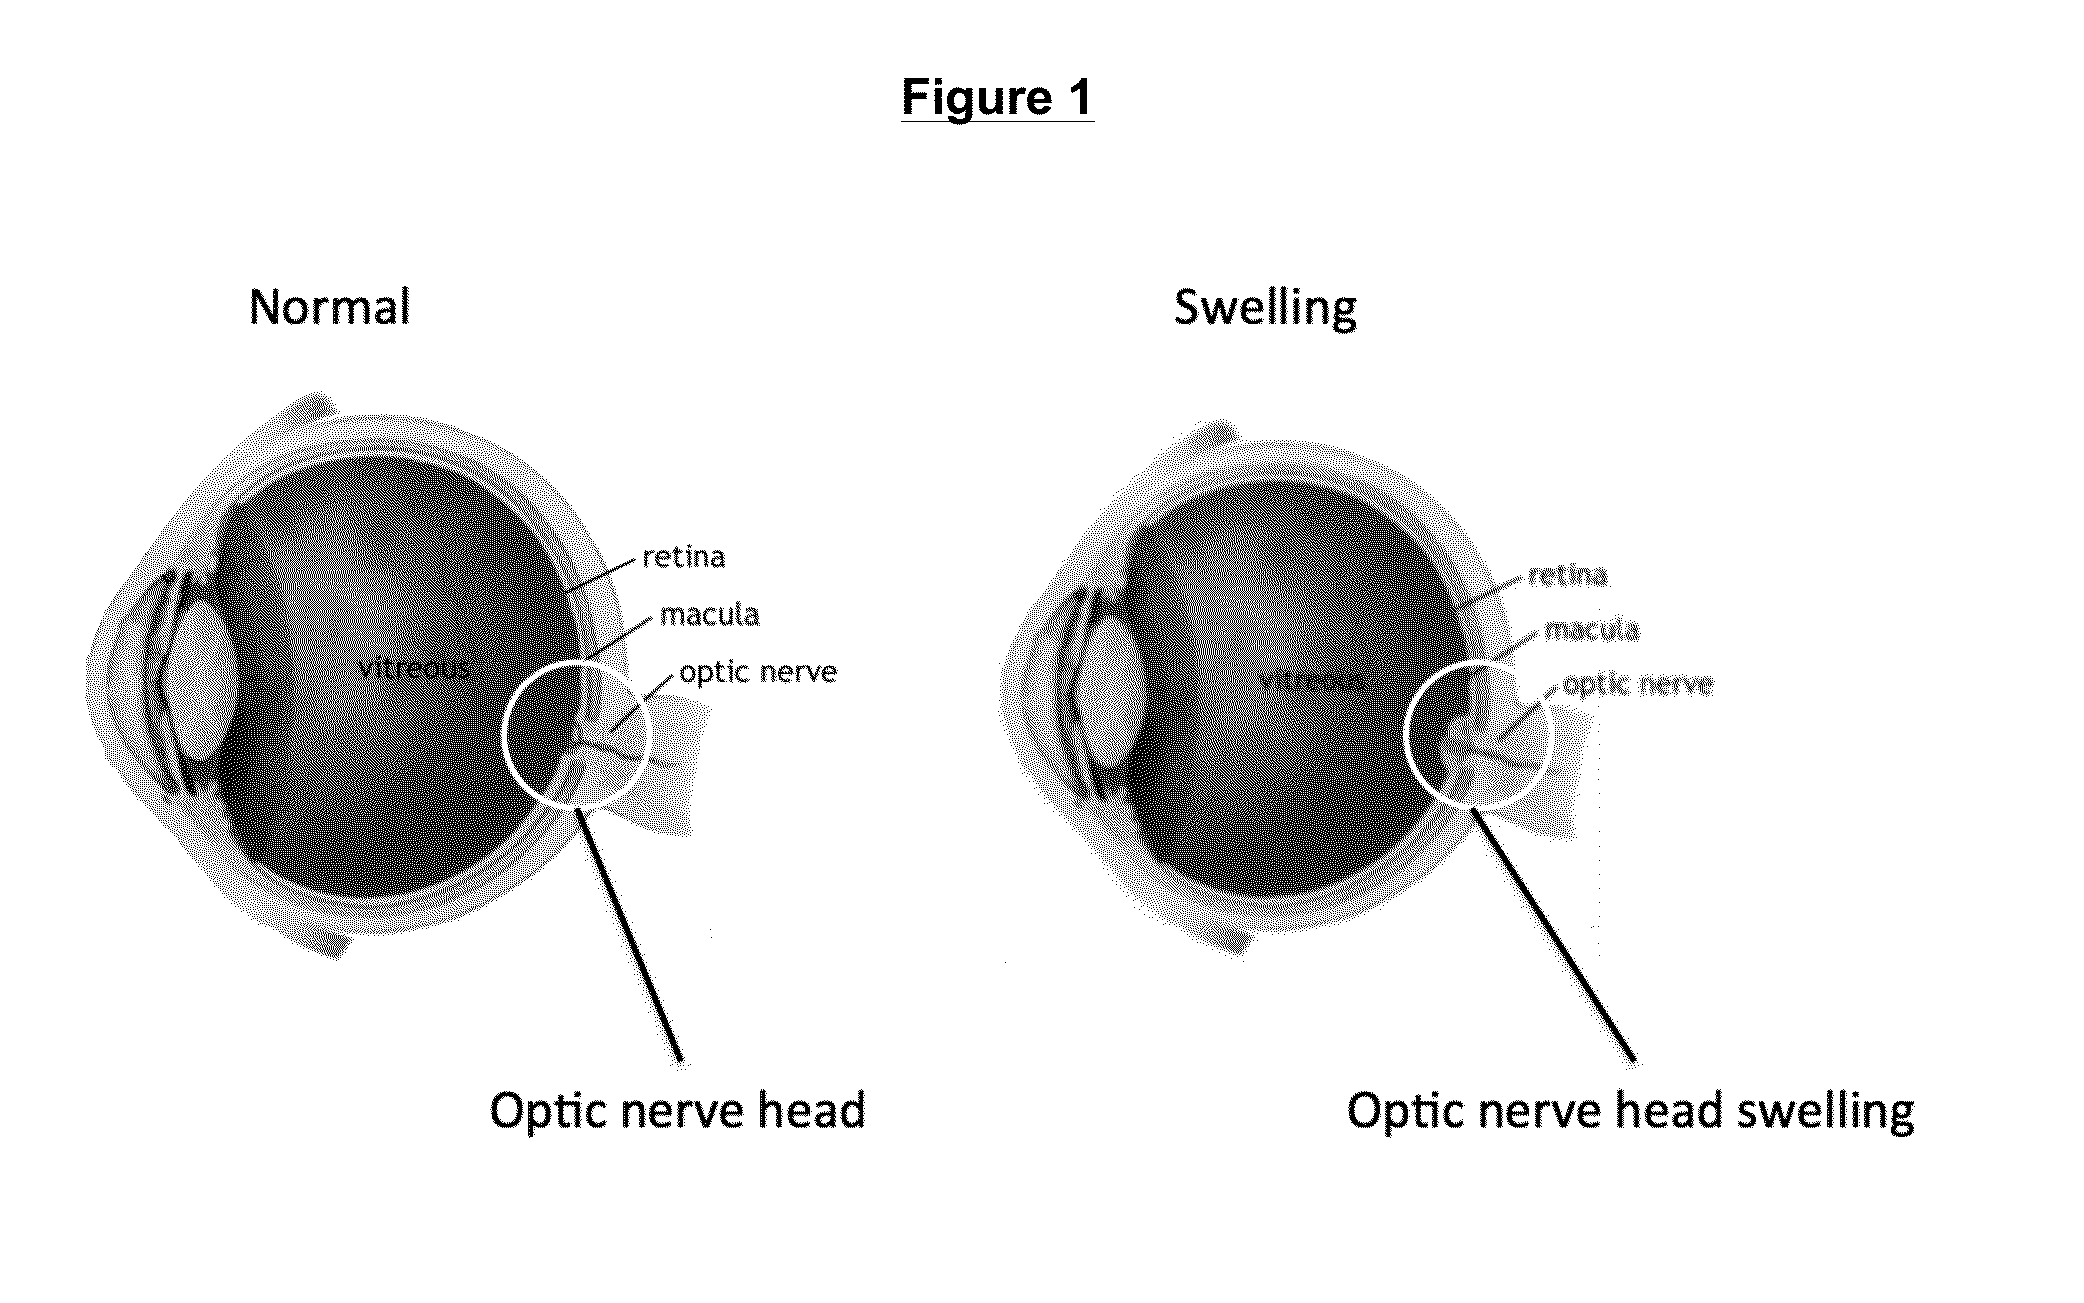 Method and System for Optic Nerve Head Shape Quantification